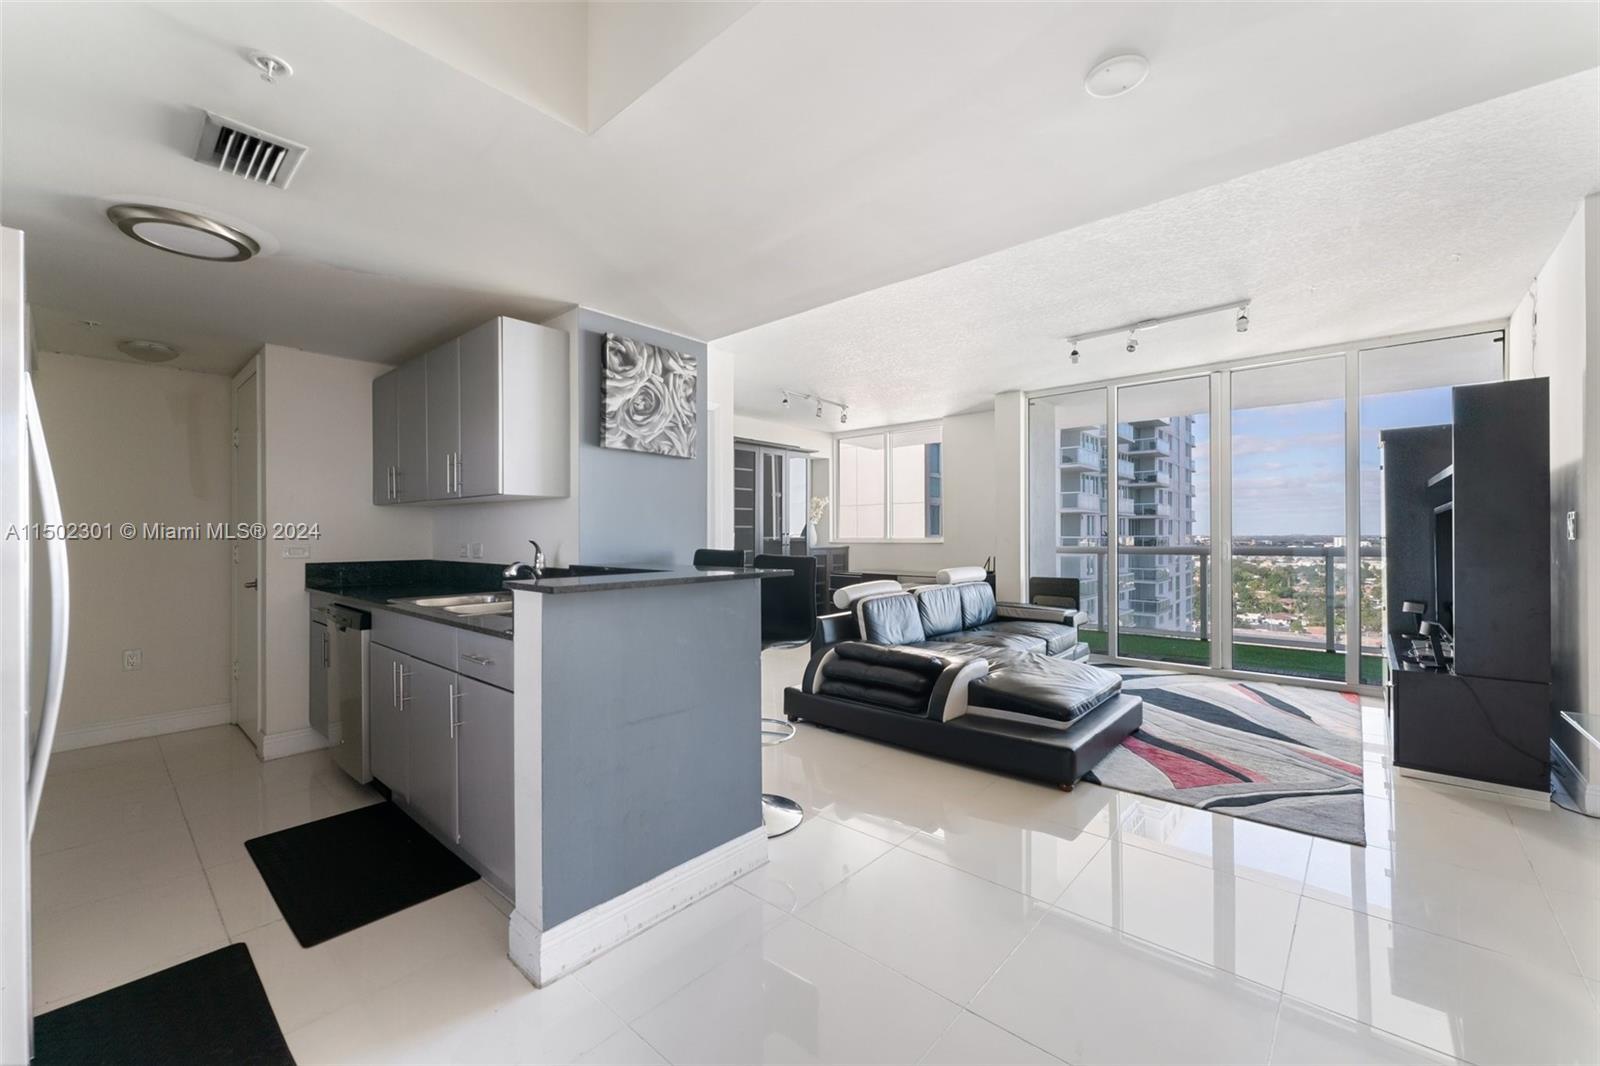 Photo of 1871 NW S River Dr #1906 in Miami, FL